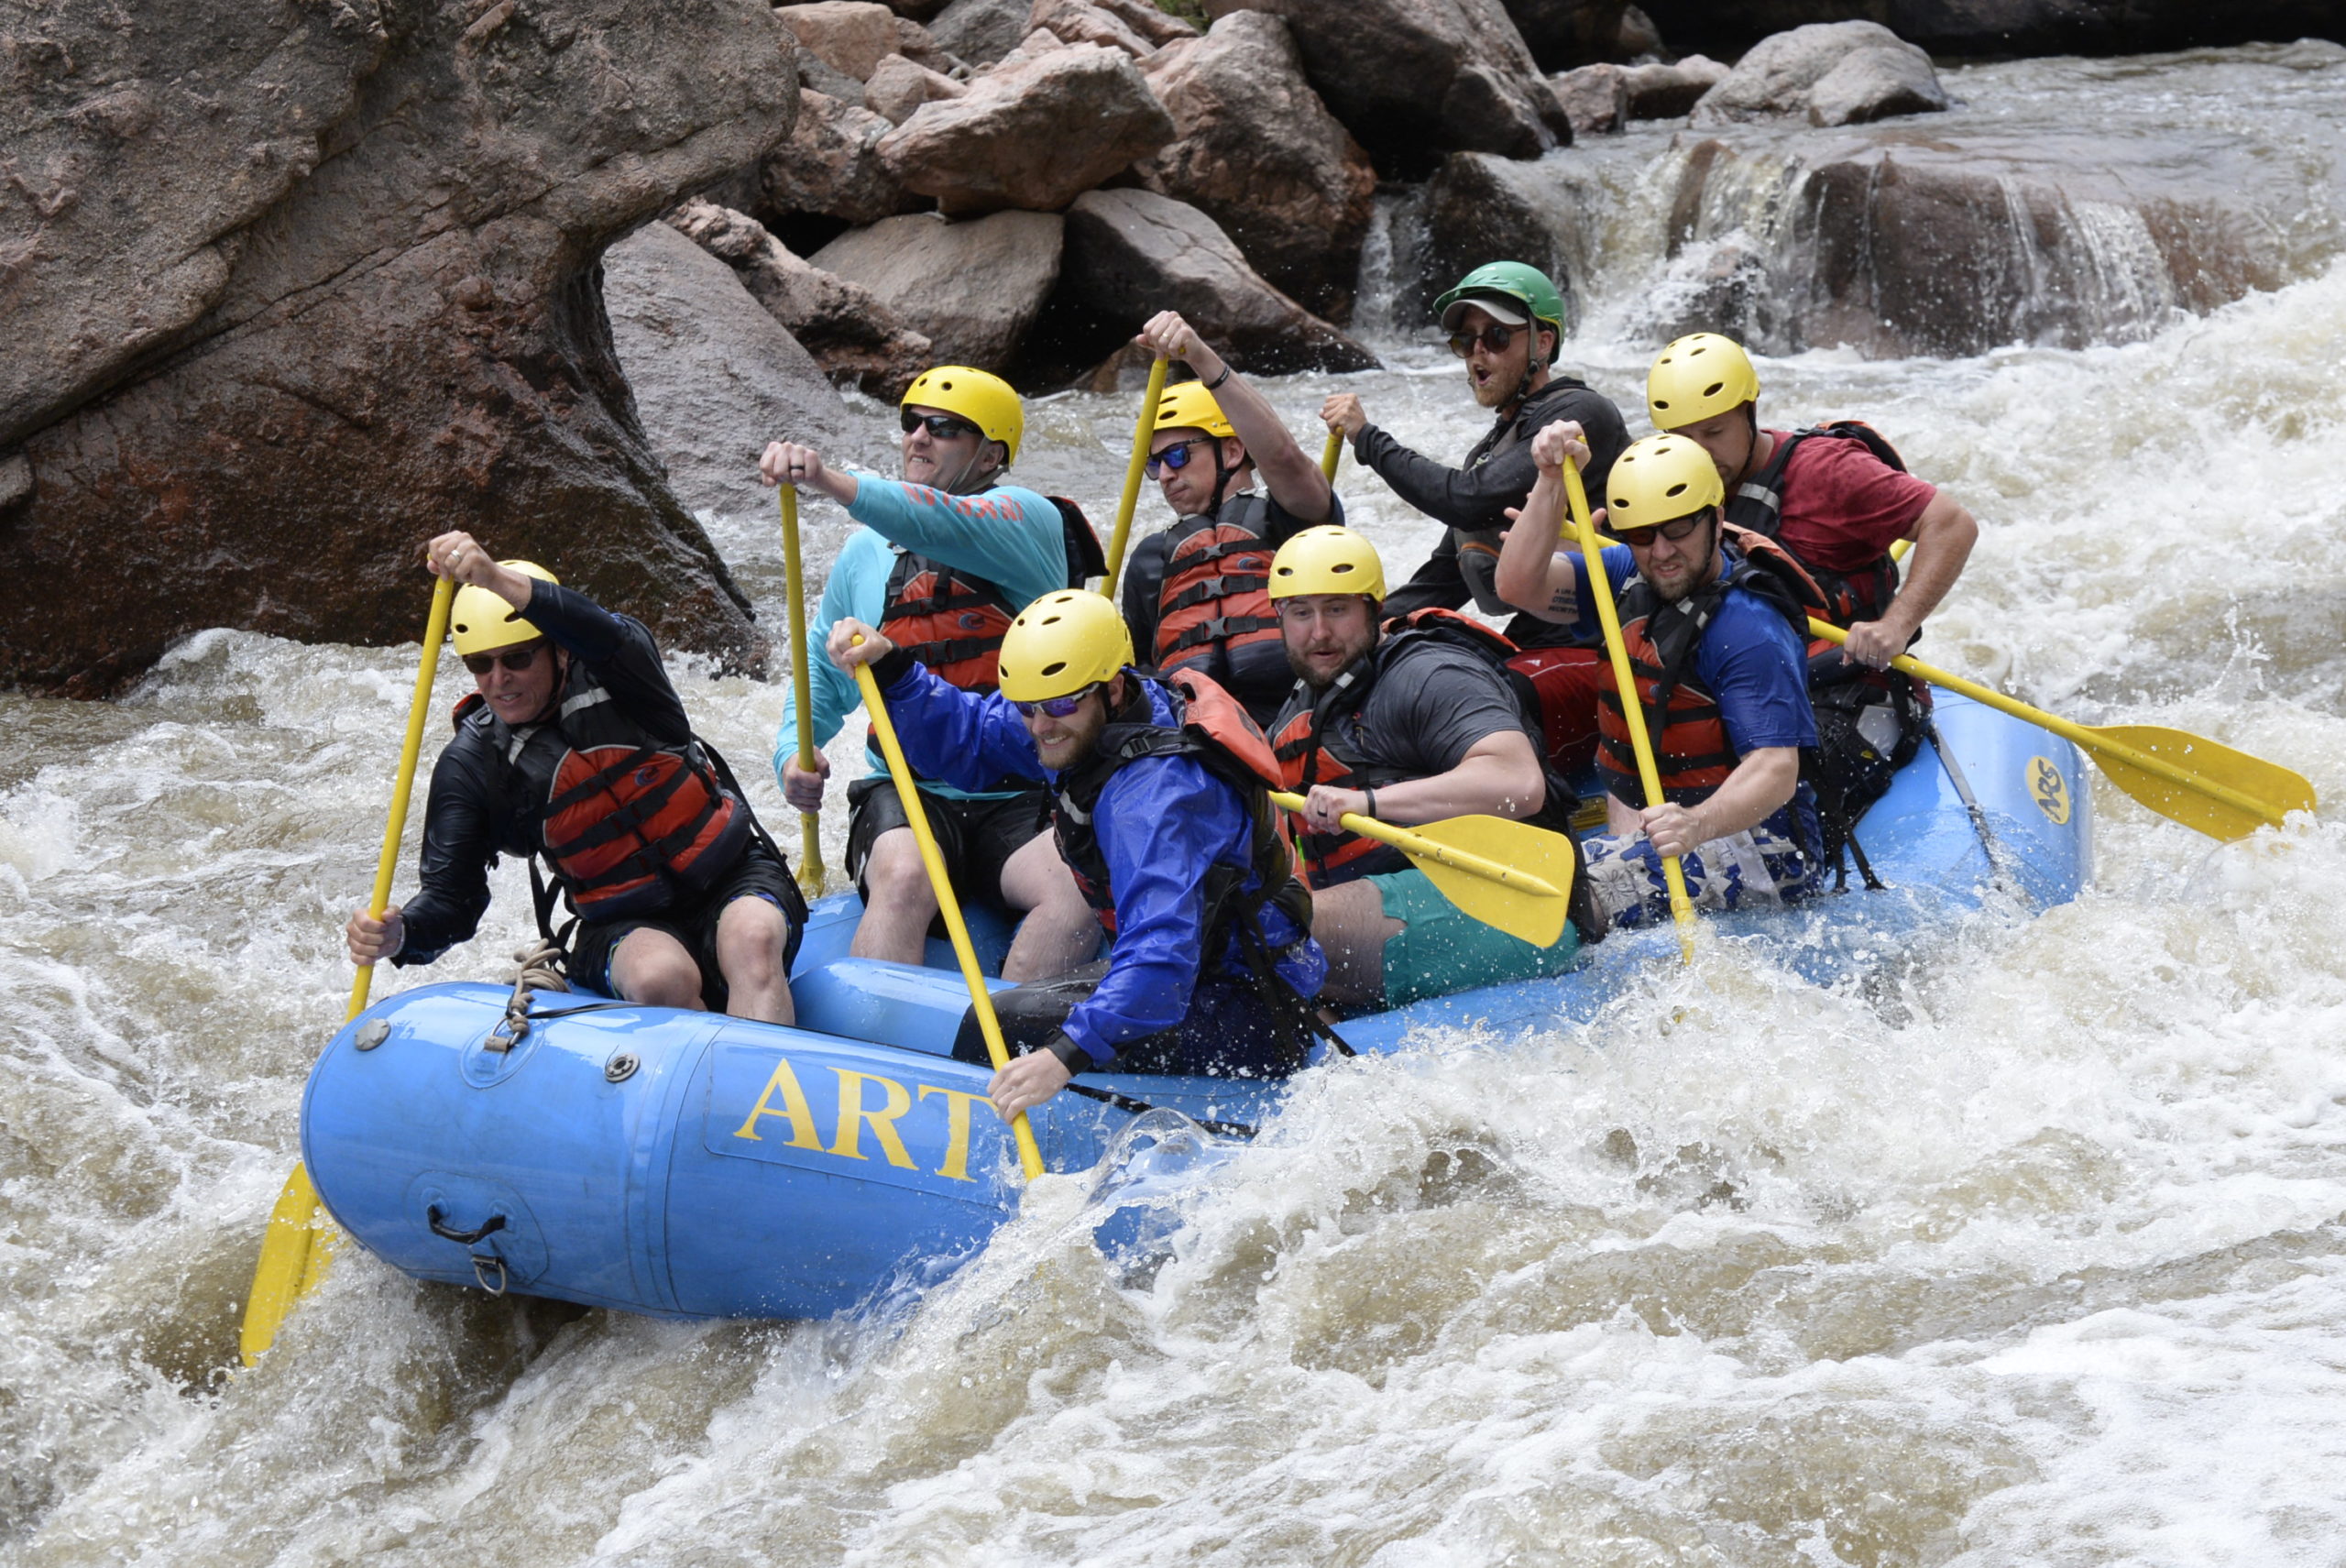 Top 3 Rivers For Whitewater Rafting Near Denver